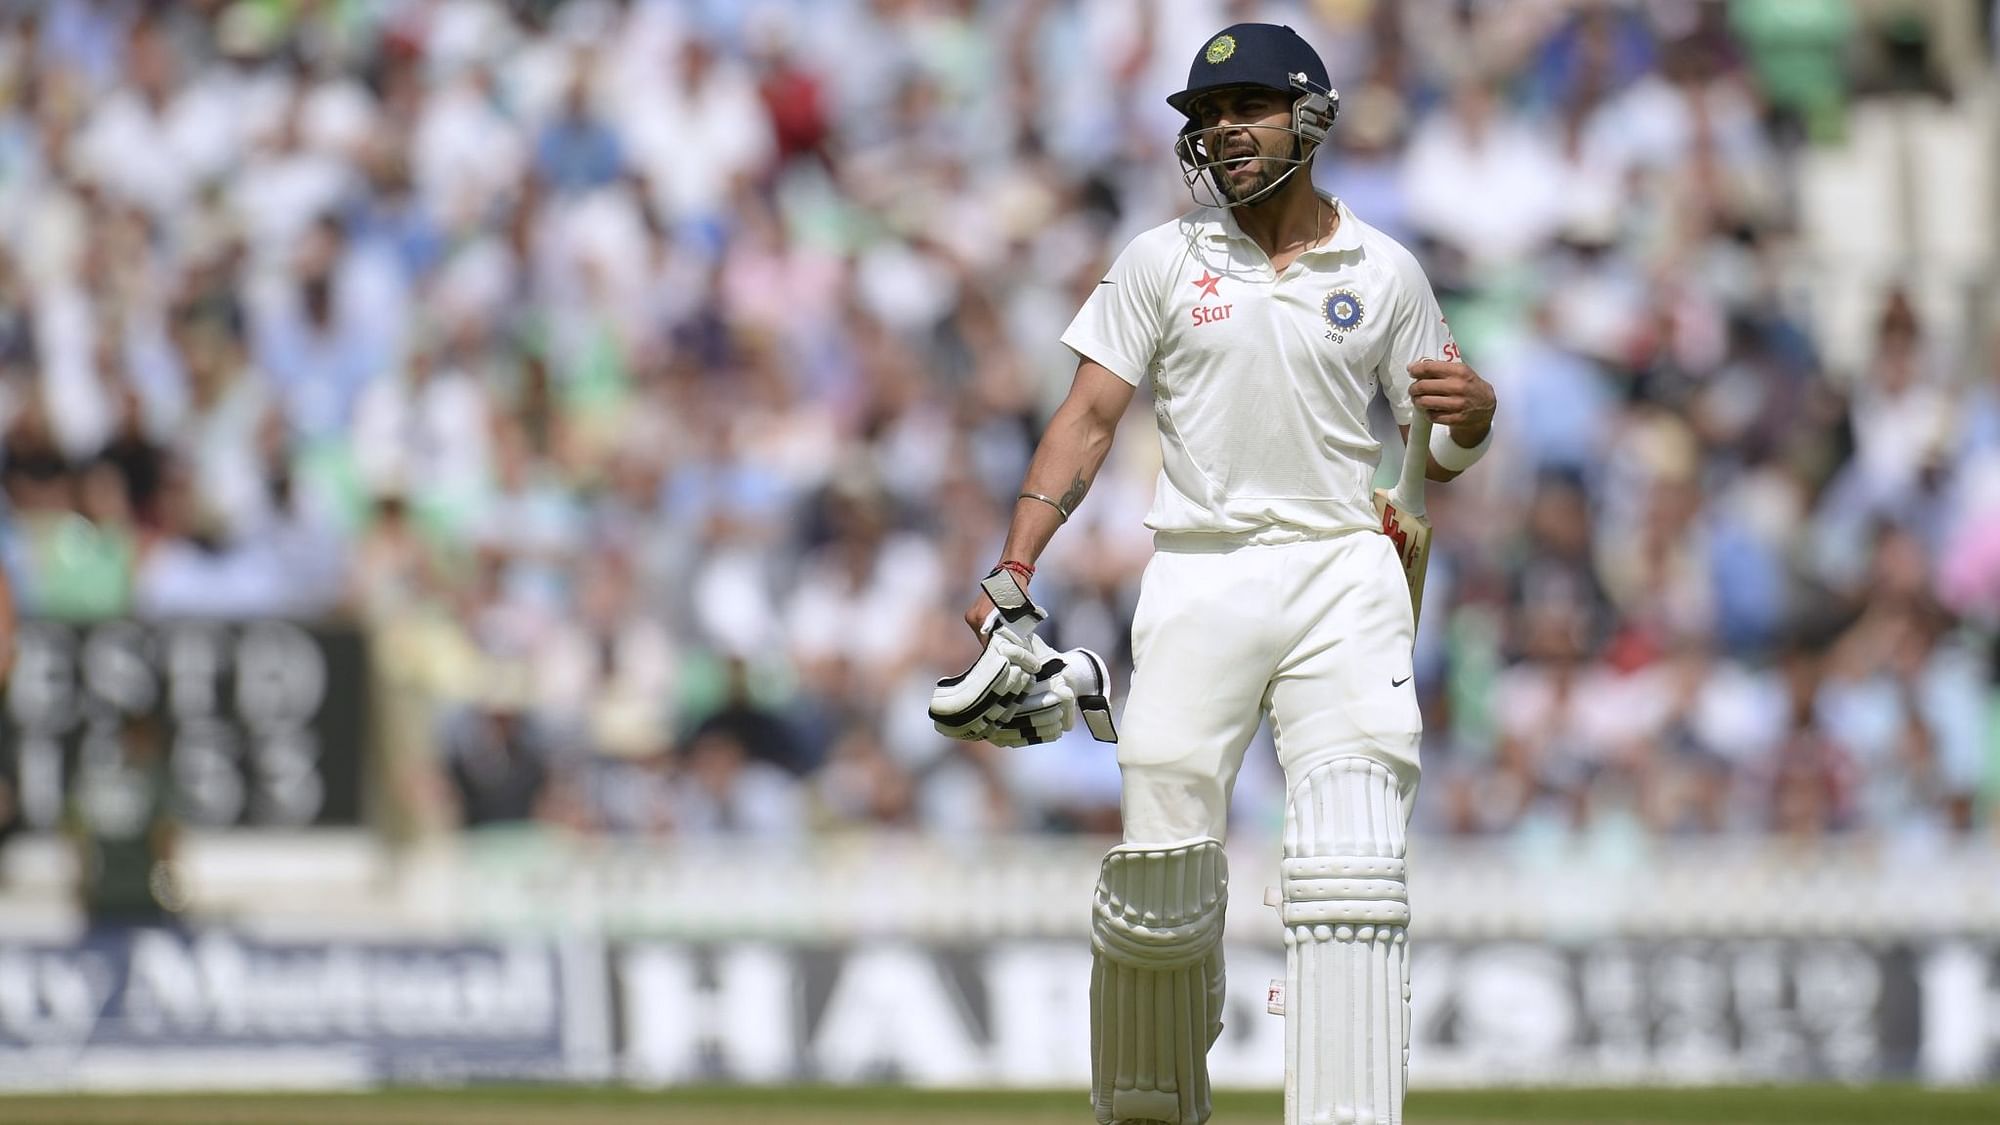 India’s Virat Kohli leaves the field after being dismissed during the fifth Test against England at the Oval in 2014.